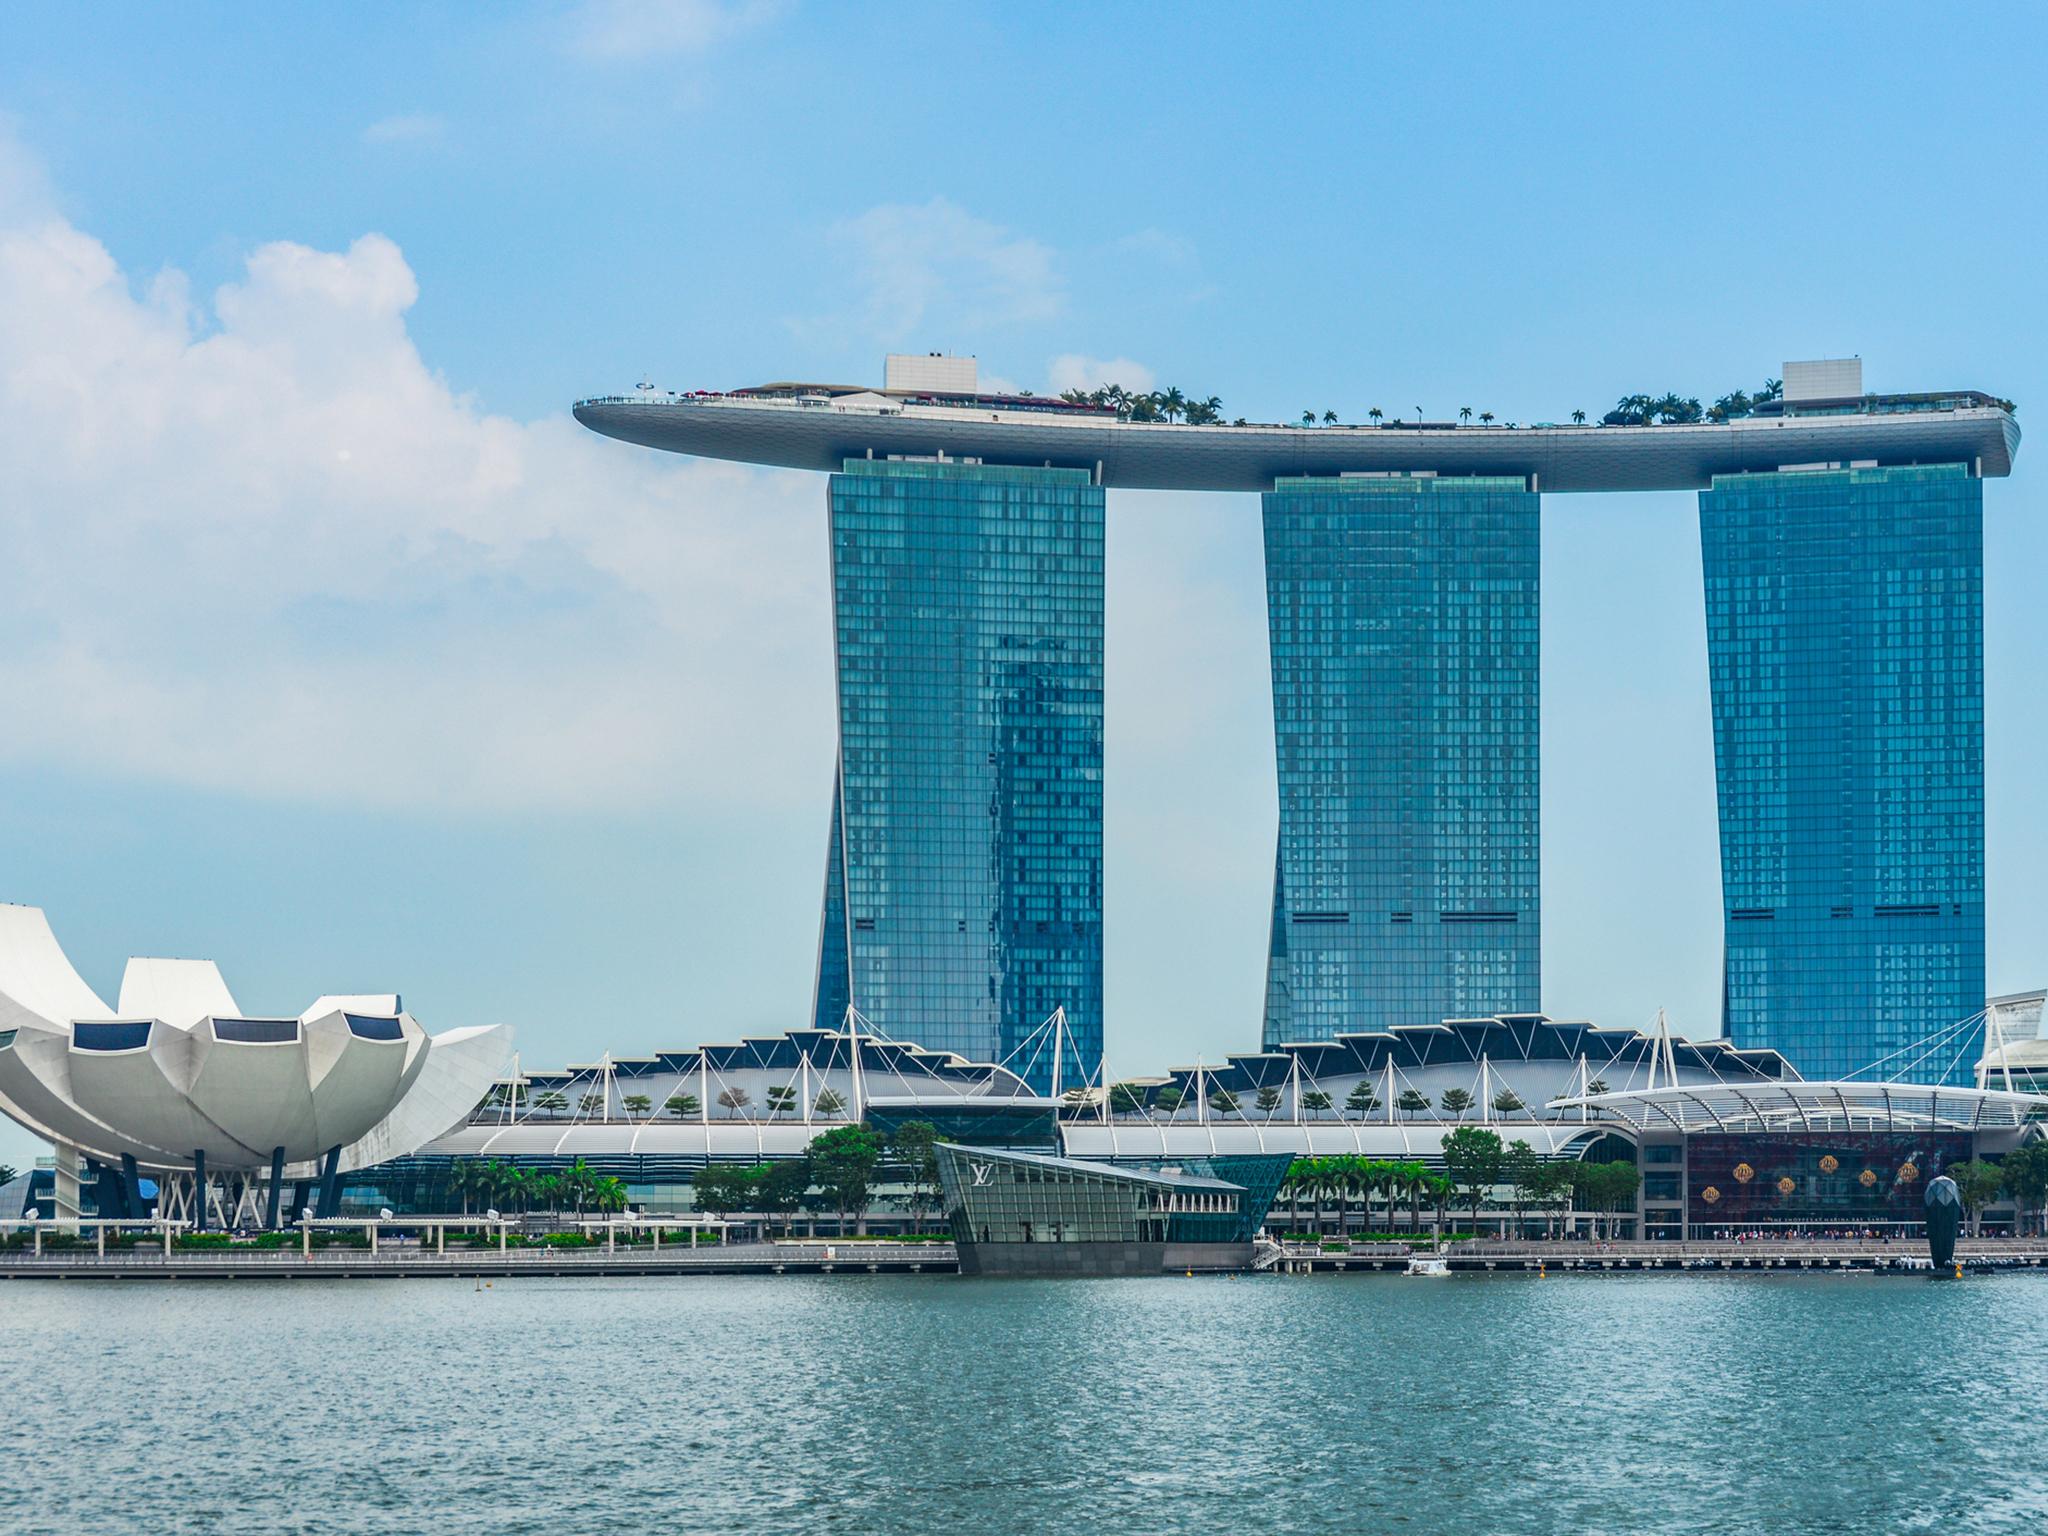 The Marina Bay Sands hotel is a highlight of the downtown skyline (Getty)